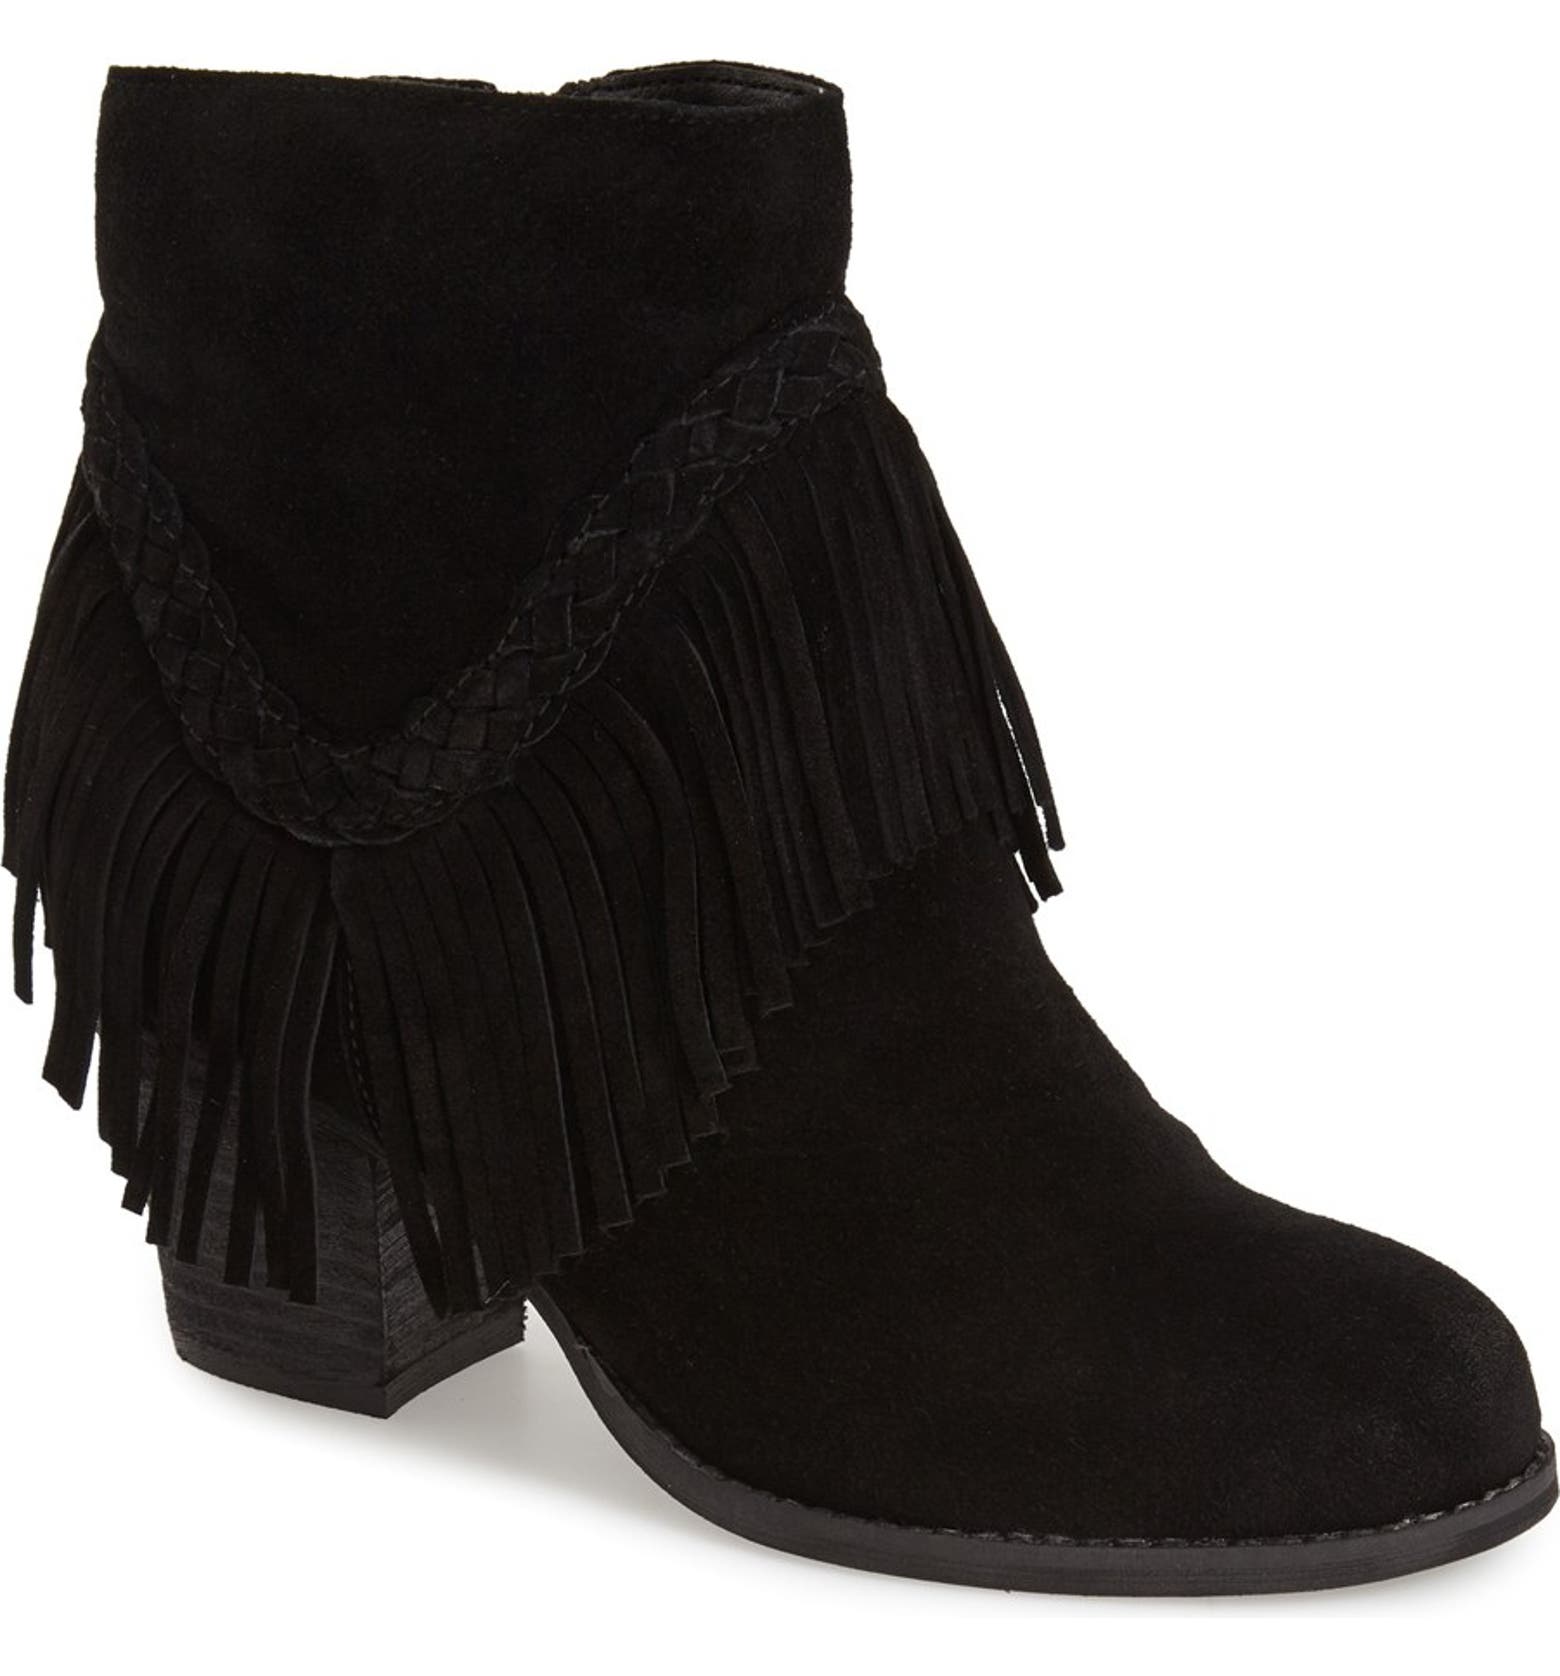 Sbicca 'Patience' Boot (Women) | Nordstrom